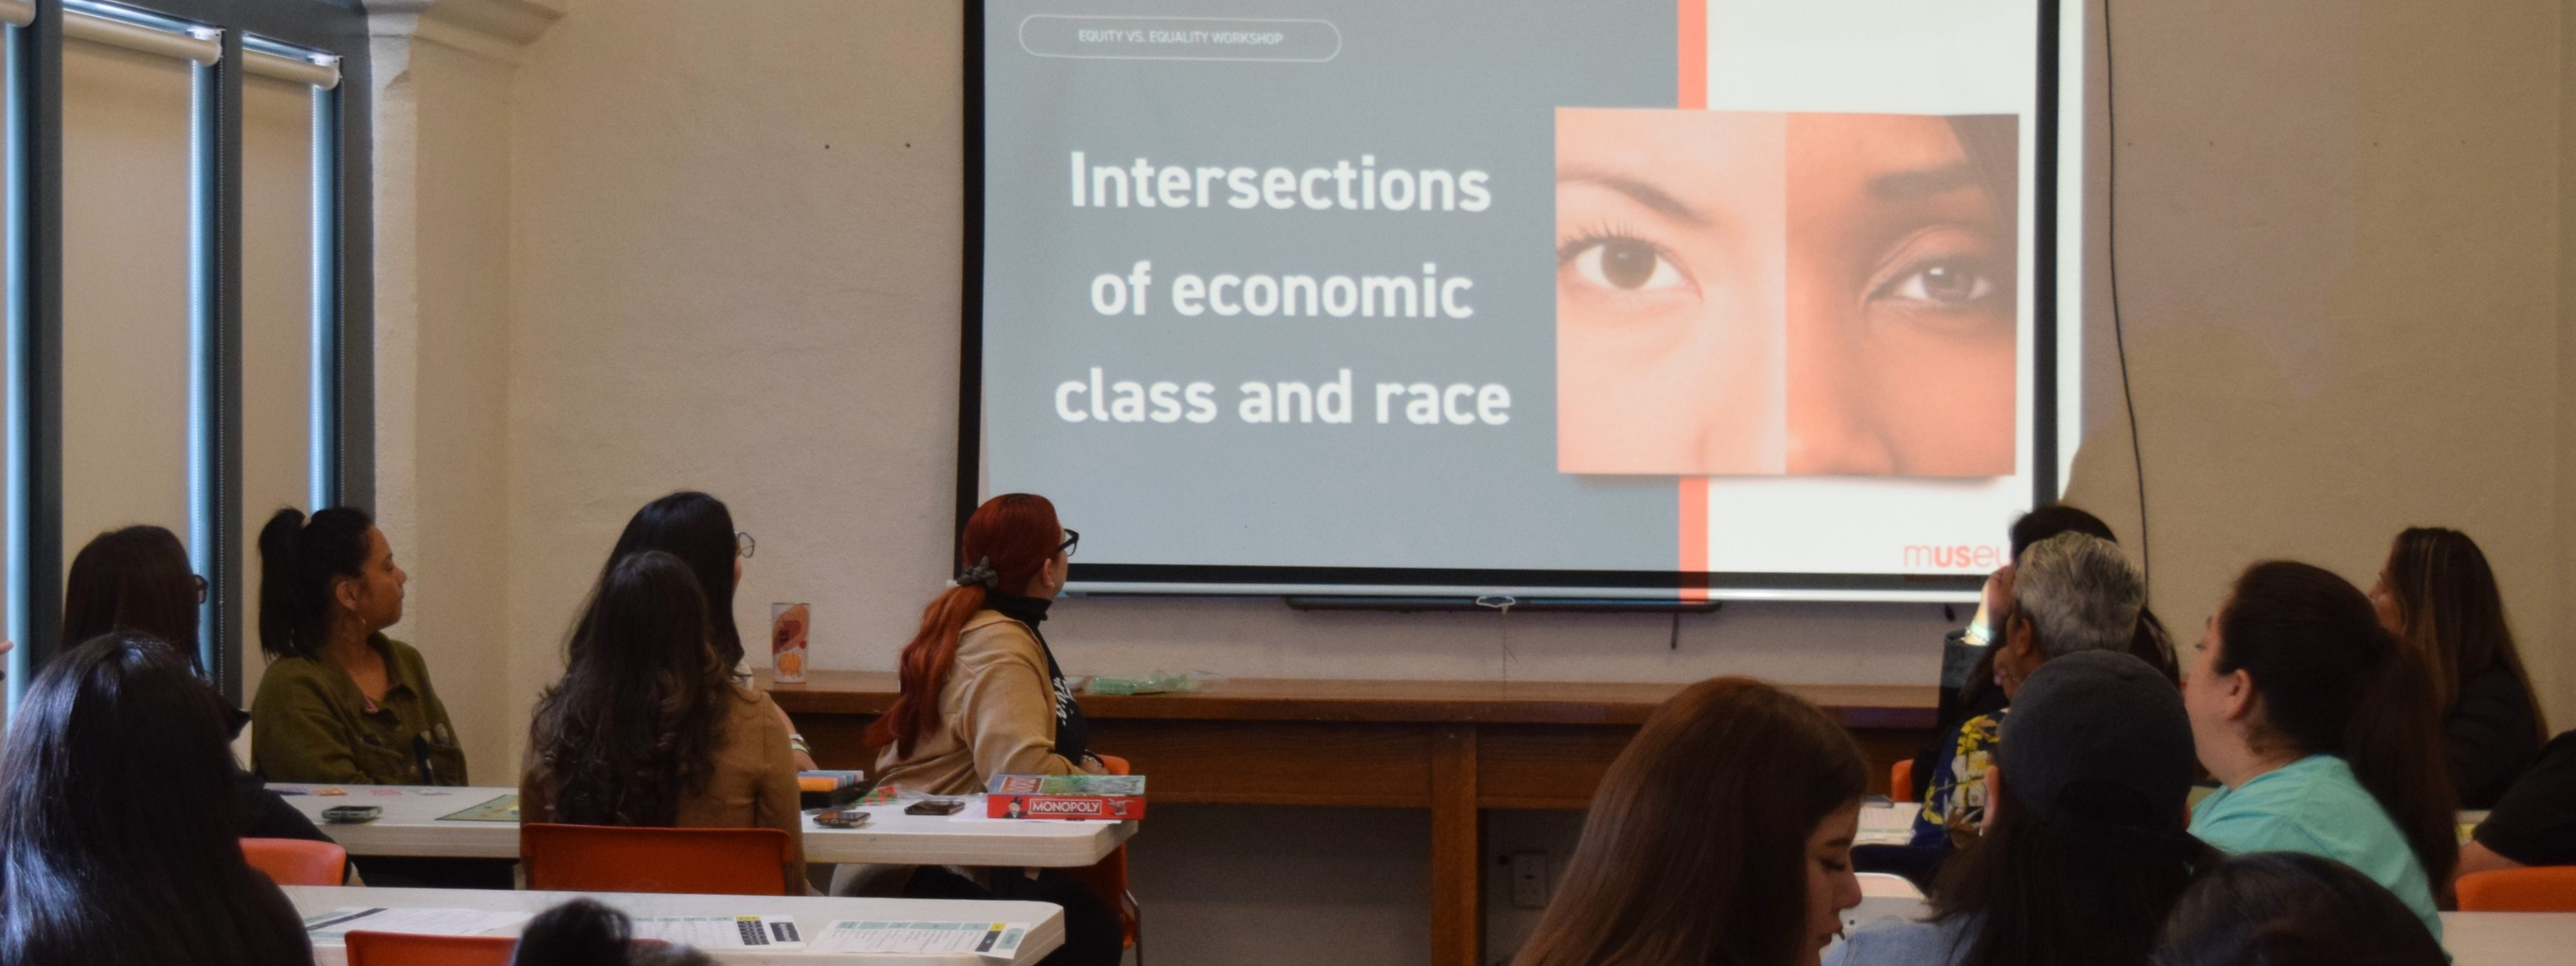 A photo of a group participating in a Race workshop at the Museum. Participants are watching a presentation about the intersections of economic class and race.